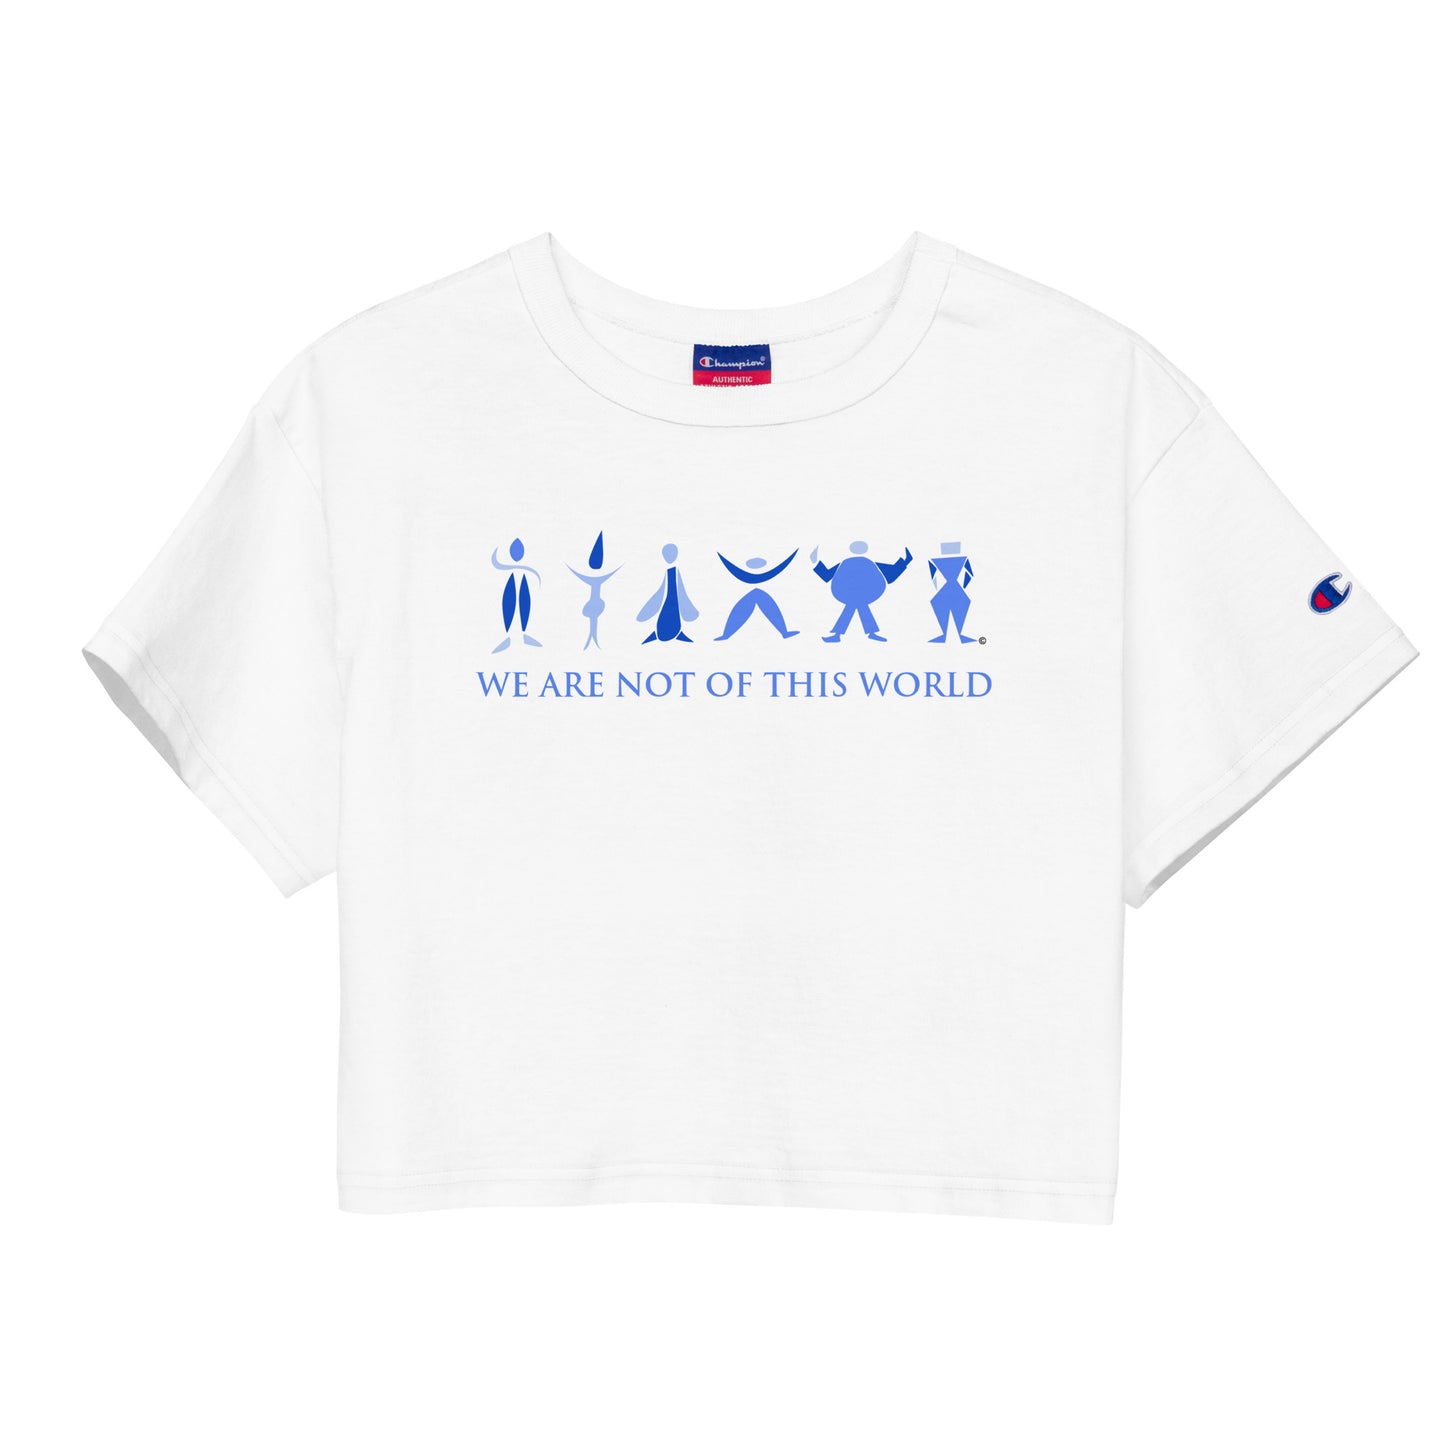 We Are Not of This World Champion Crop Top